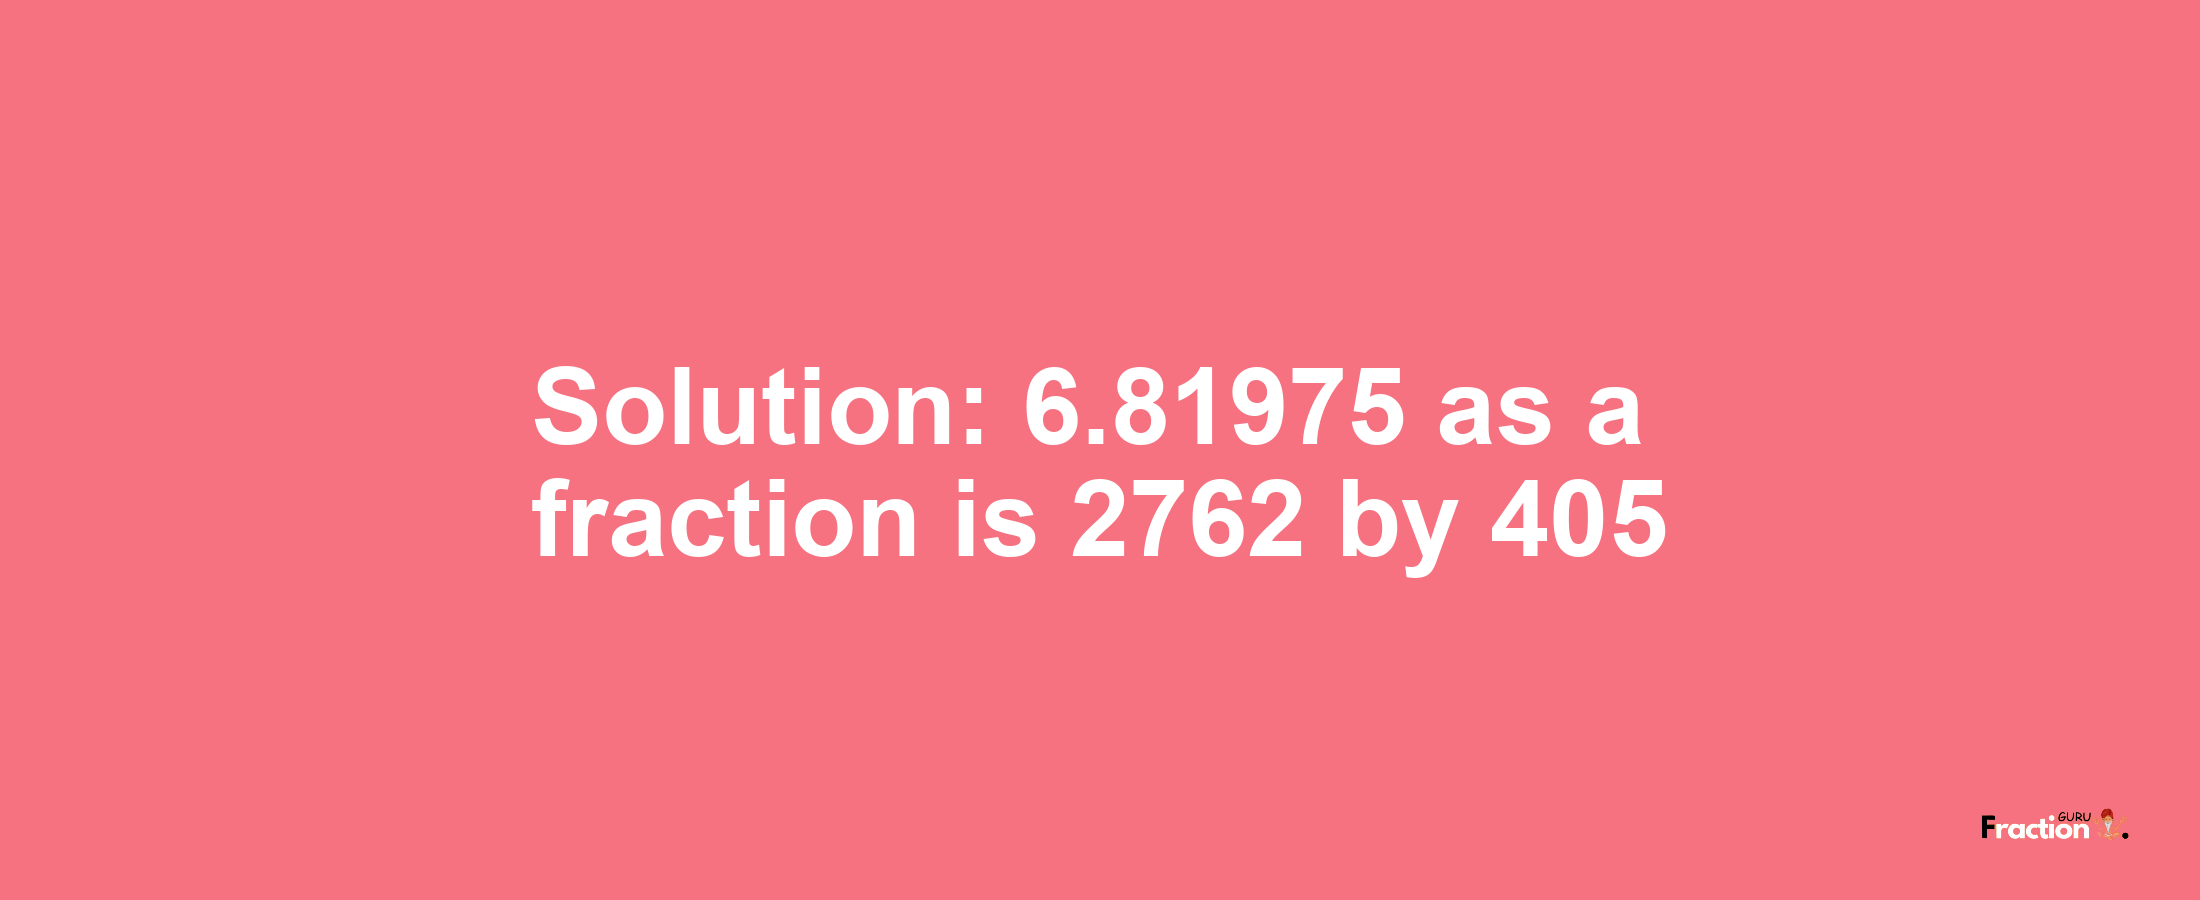 Solution:6.81975 as a fraction is 2762/405